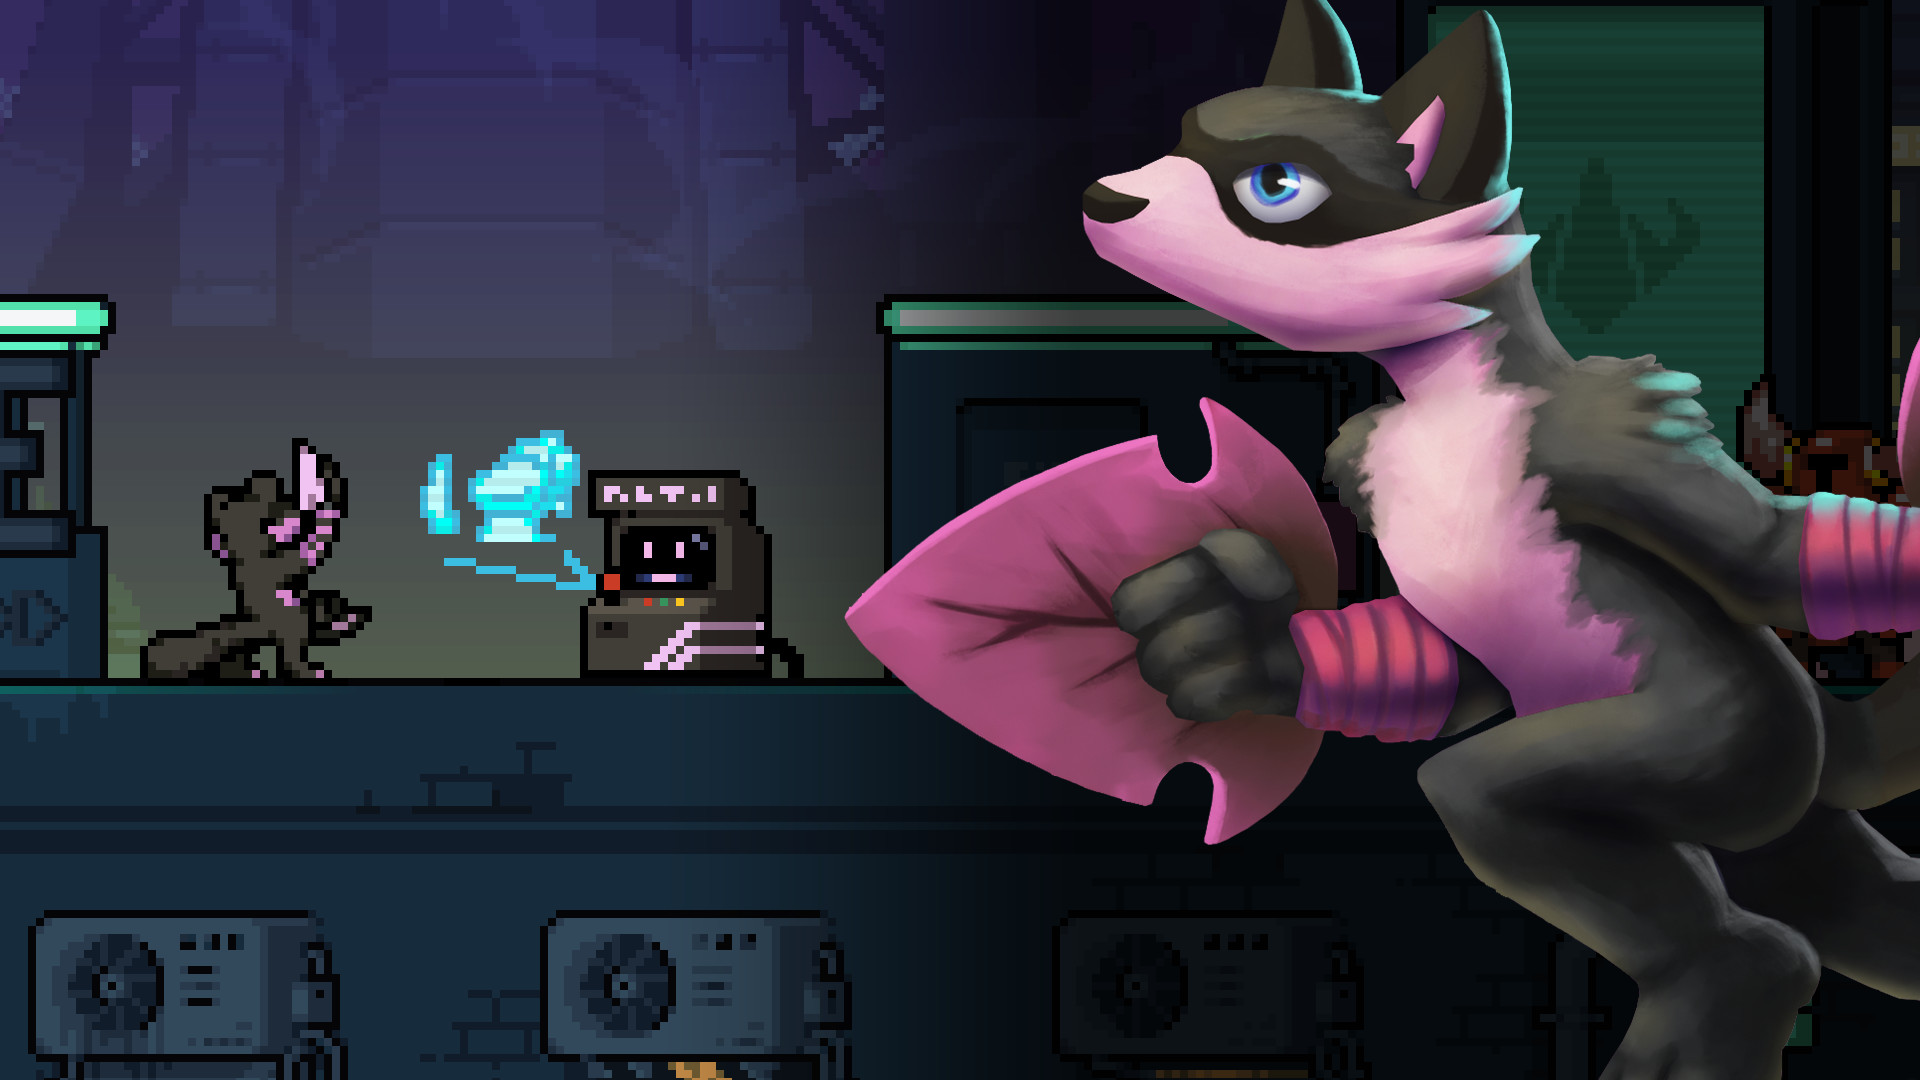 rivals of aether dlc